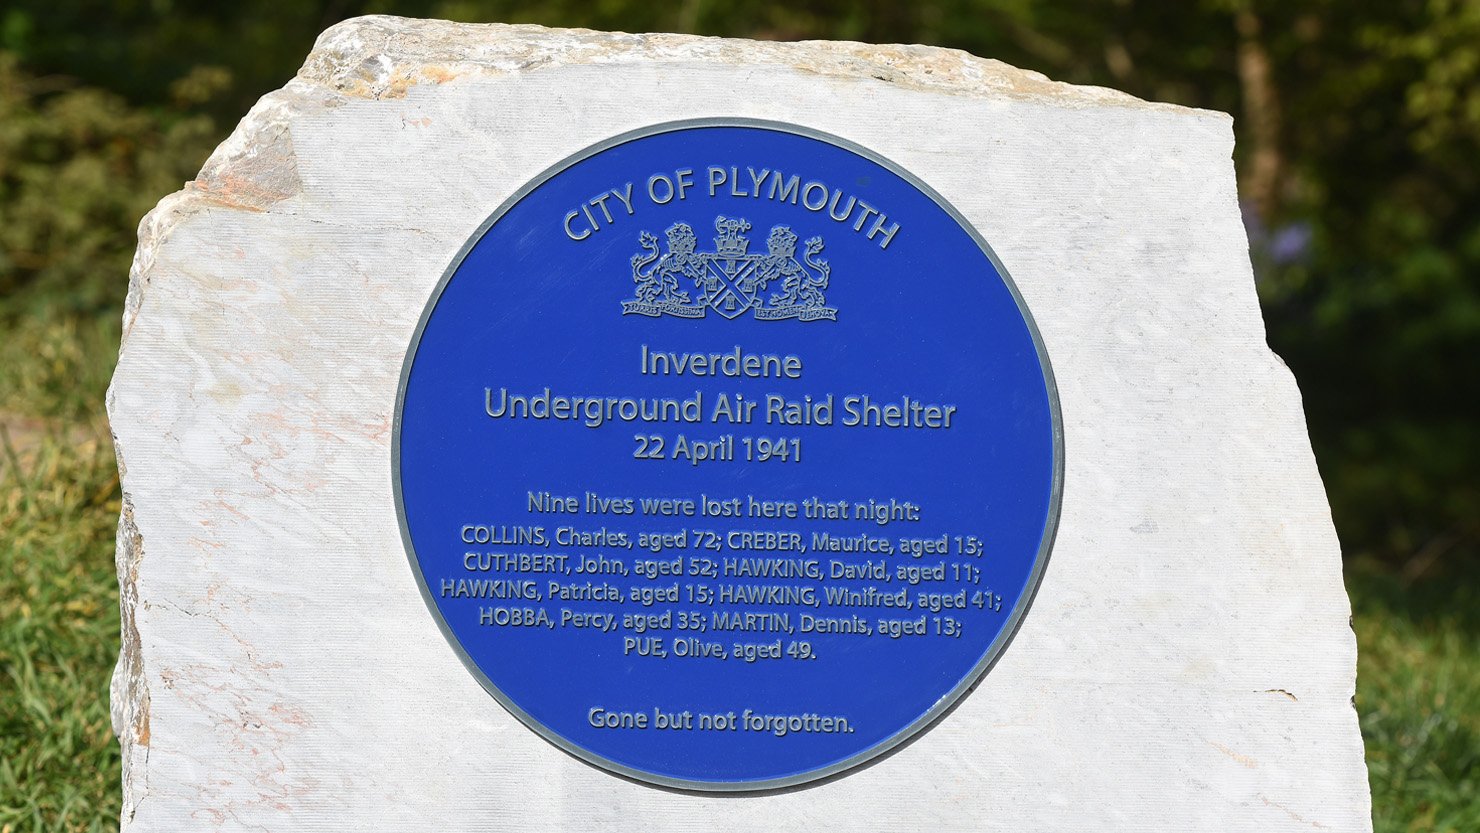 Blue plaque unveiled in honour of Plymouth air raid shelter